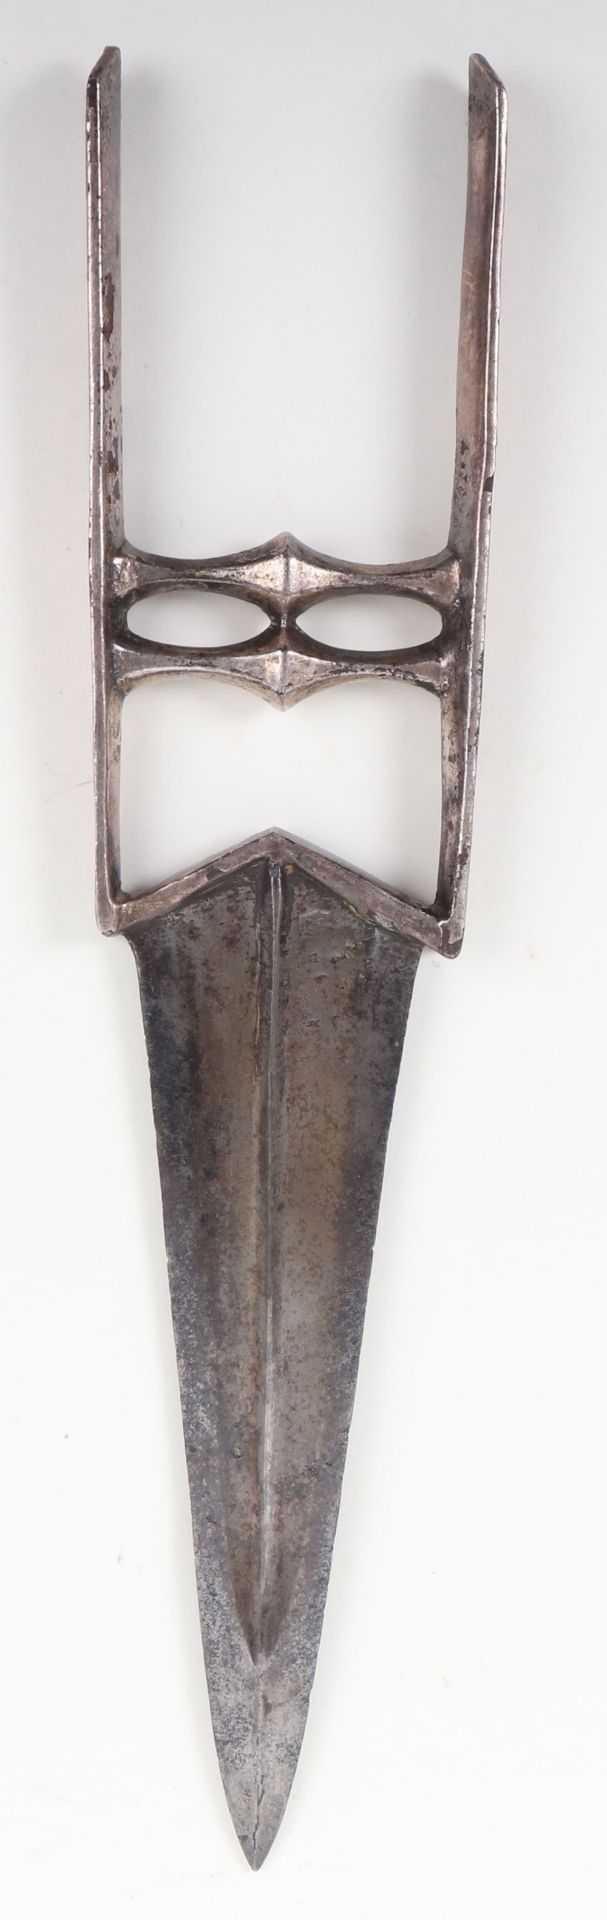 Indian Dagger Katar, Probably Late 17th or Early 18th Century - Image 2 of 9